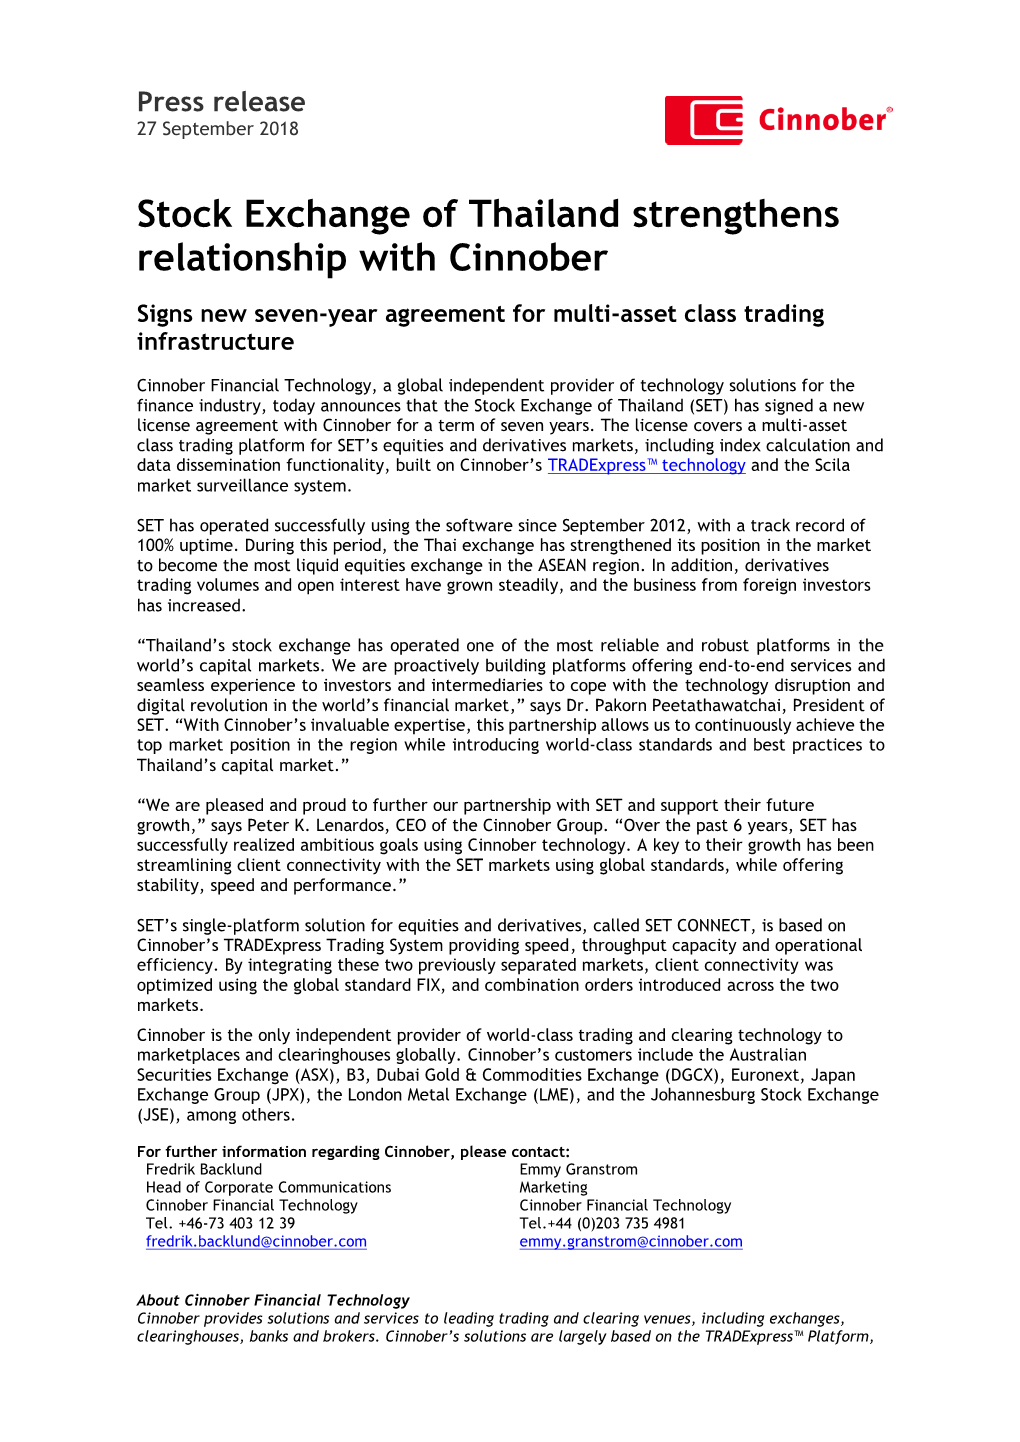 Stock Exchange of Thailand Strengthens Relationship with Cinnober